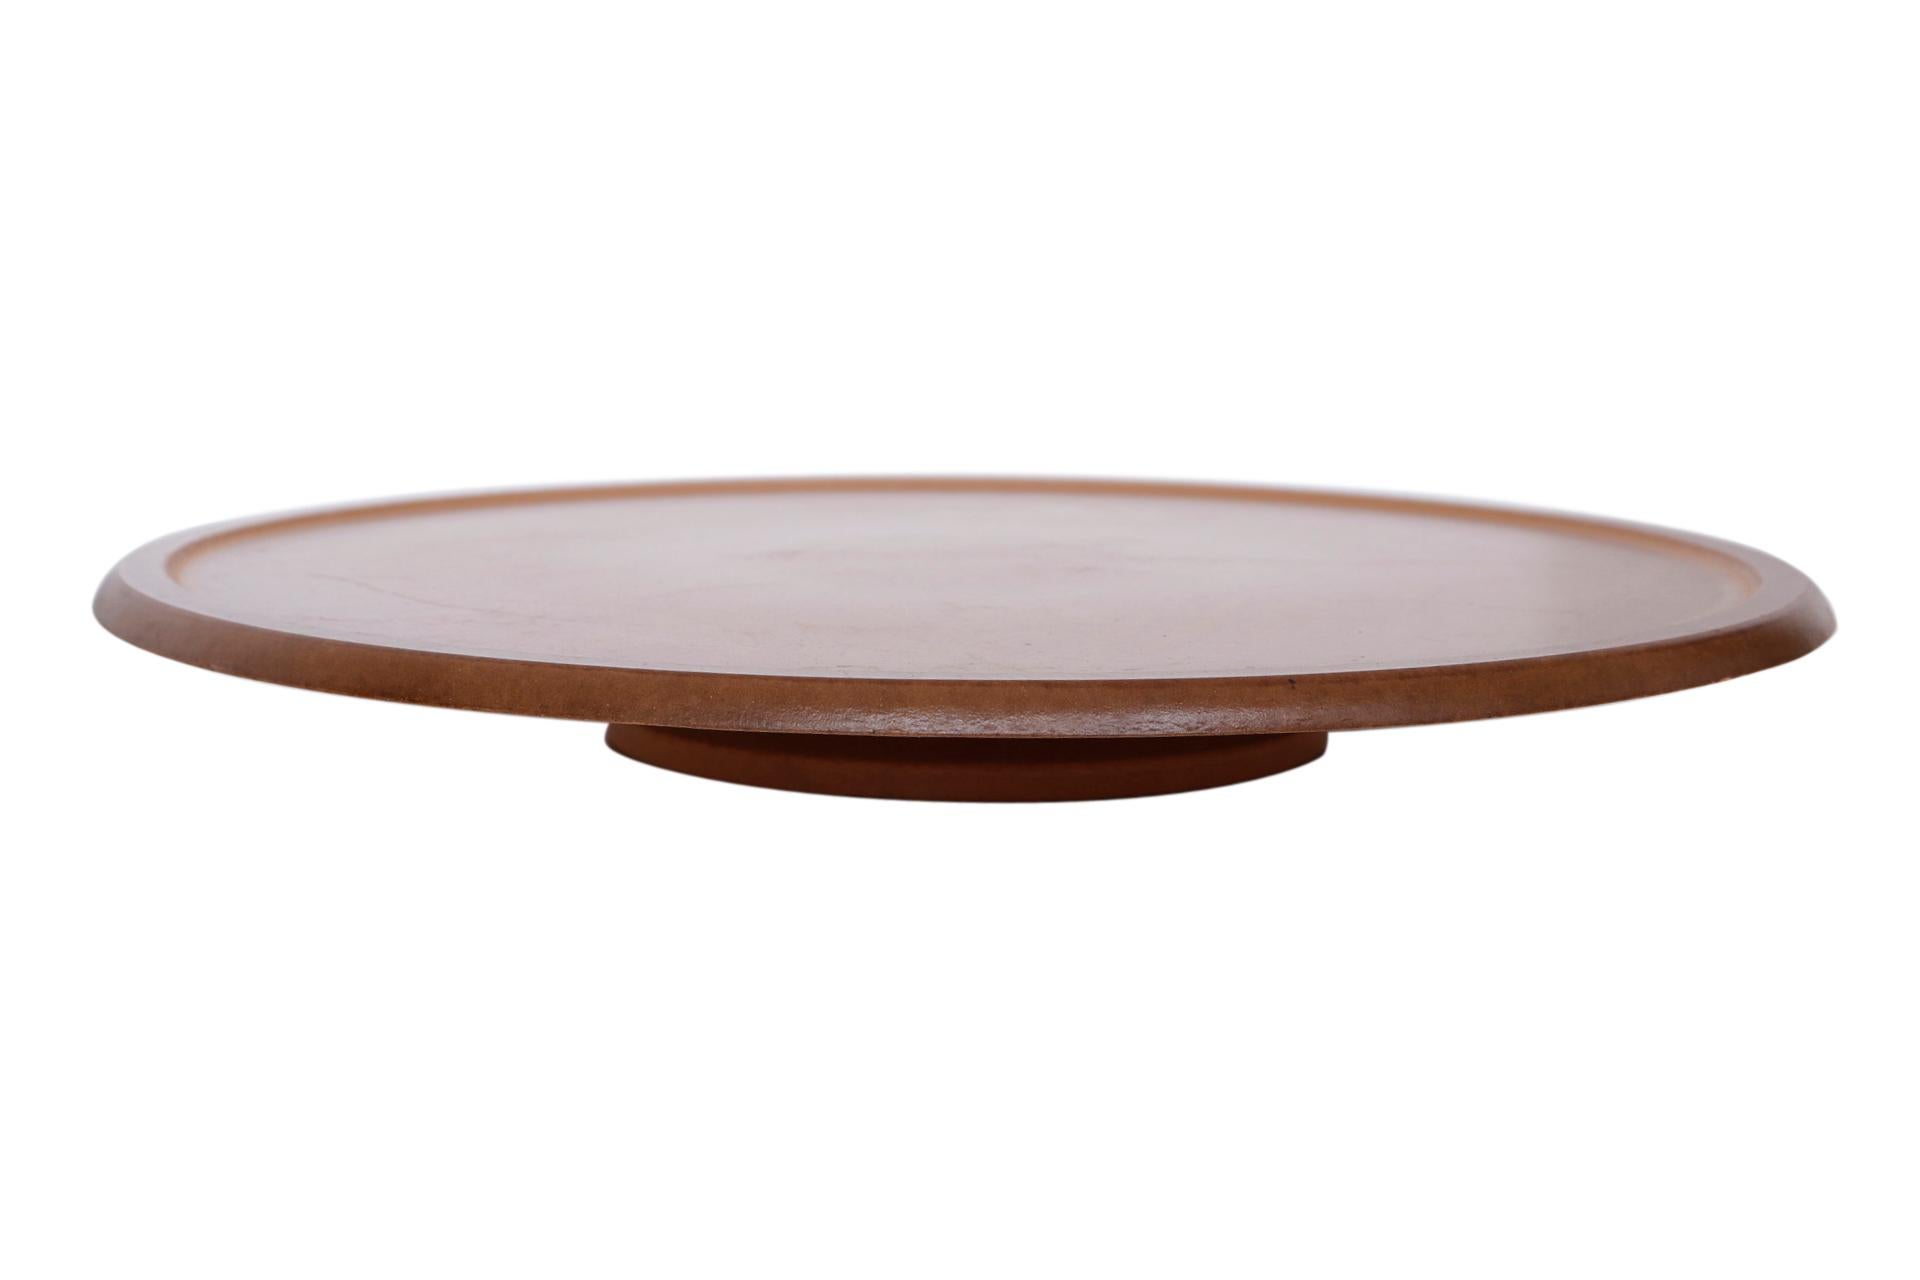 lazy susan with serving dishes